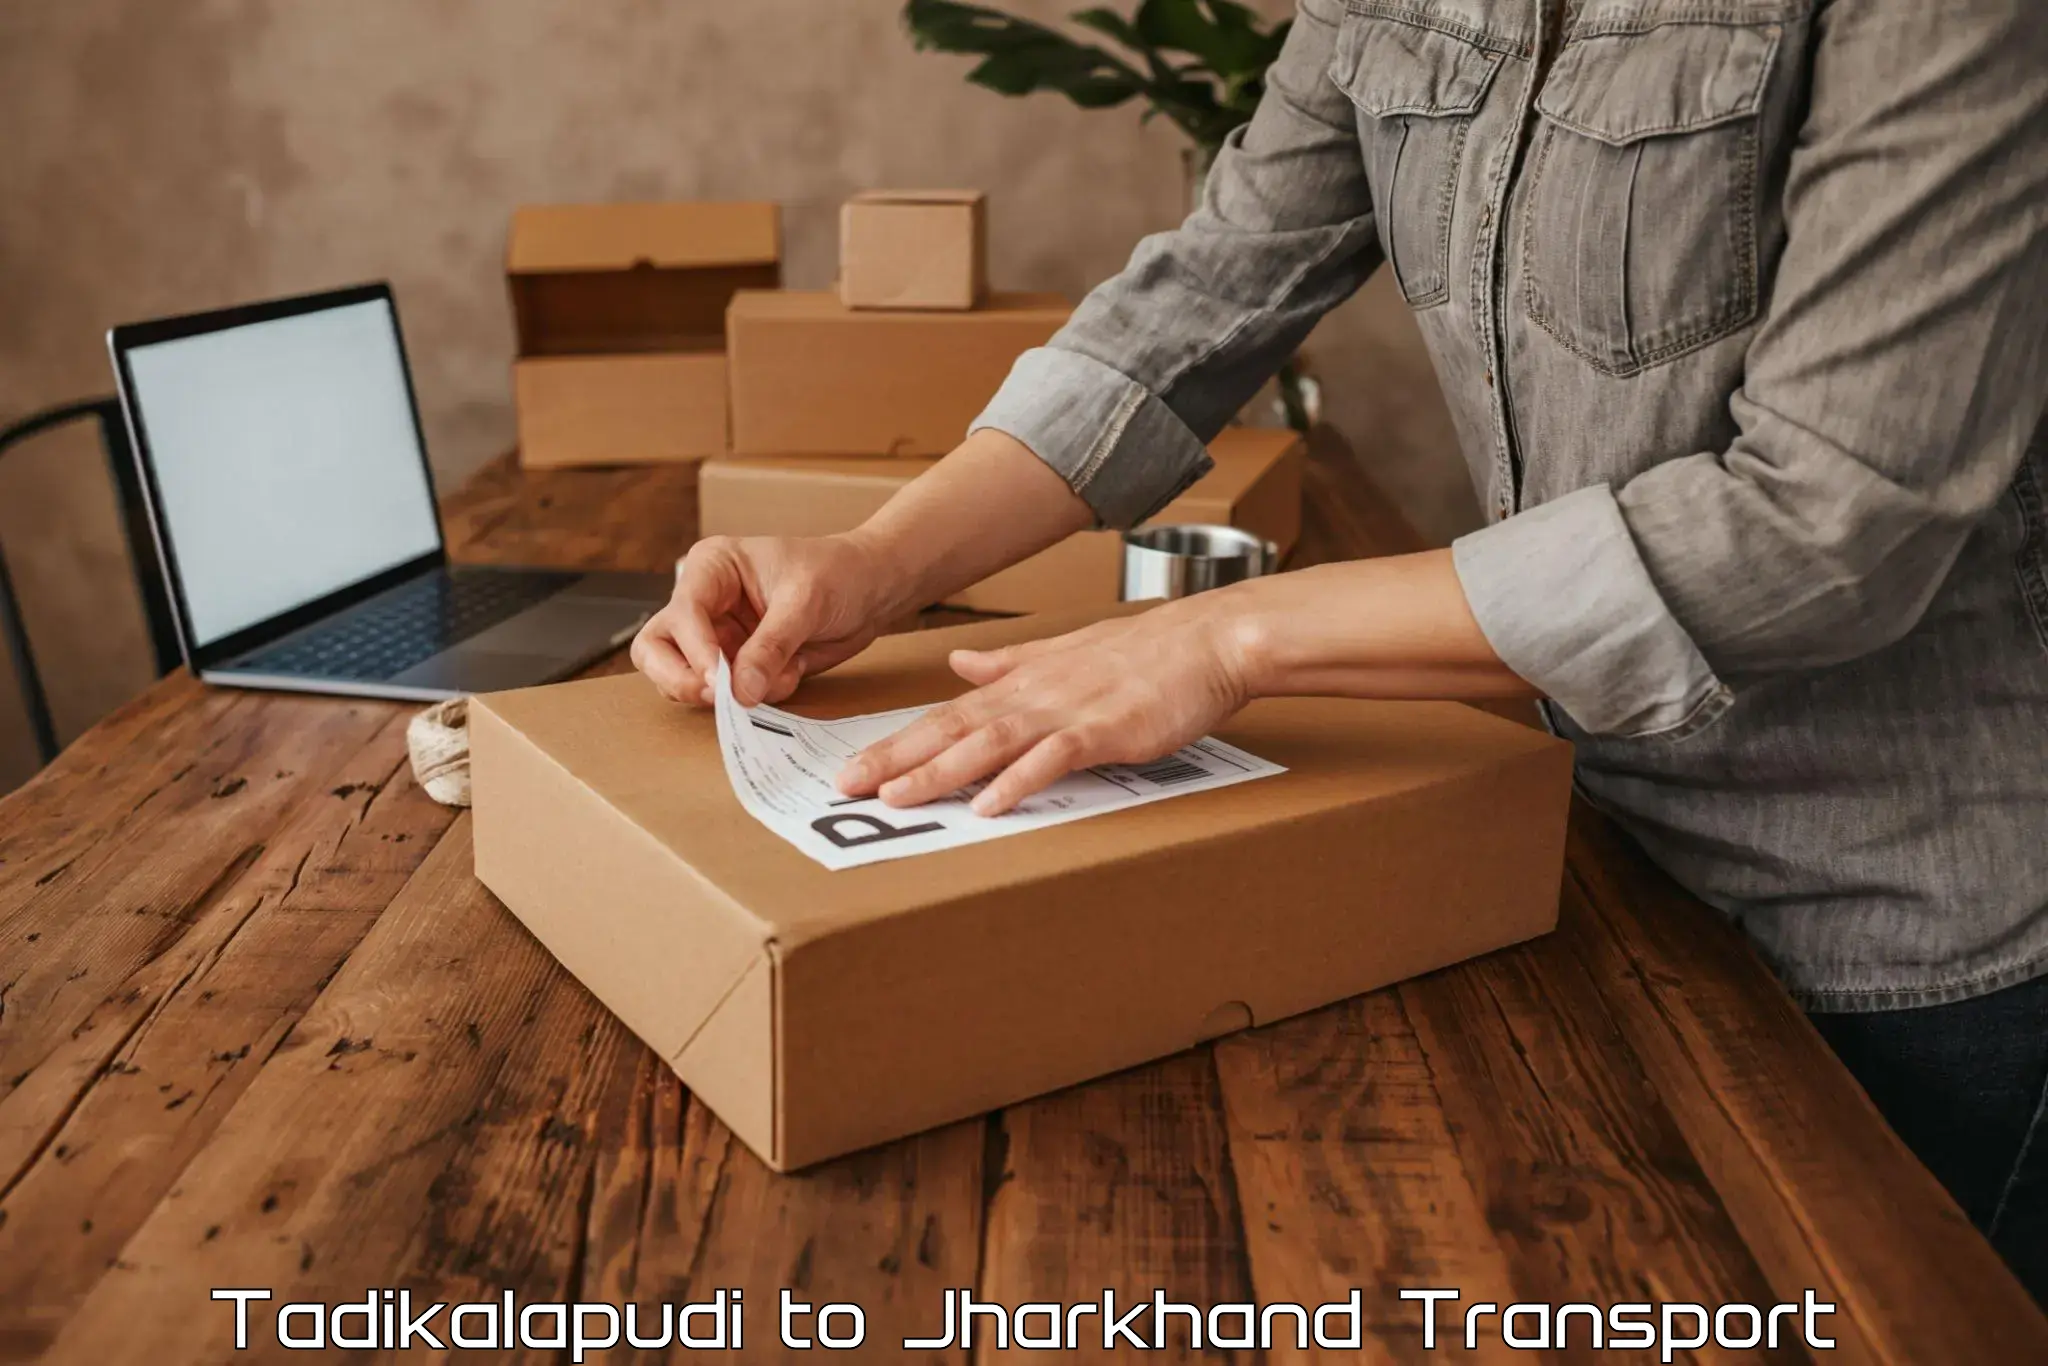 Road transport online services in Tadikalapudi to Jharkhand